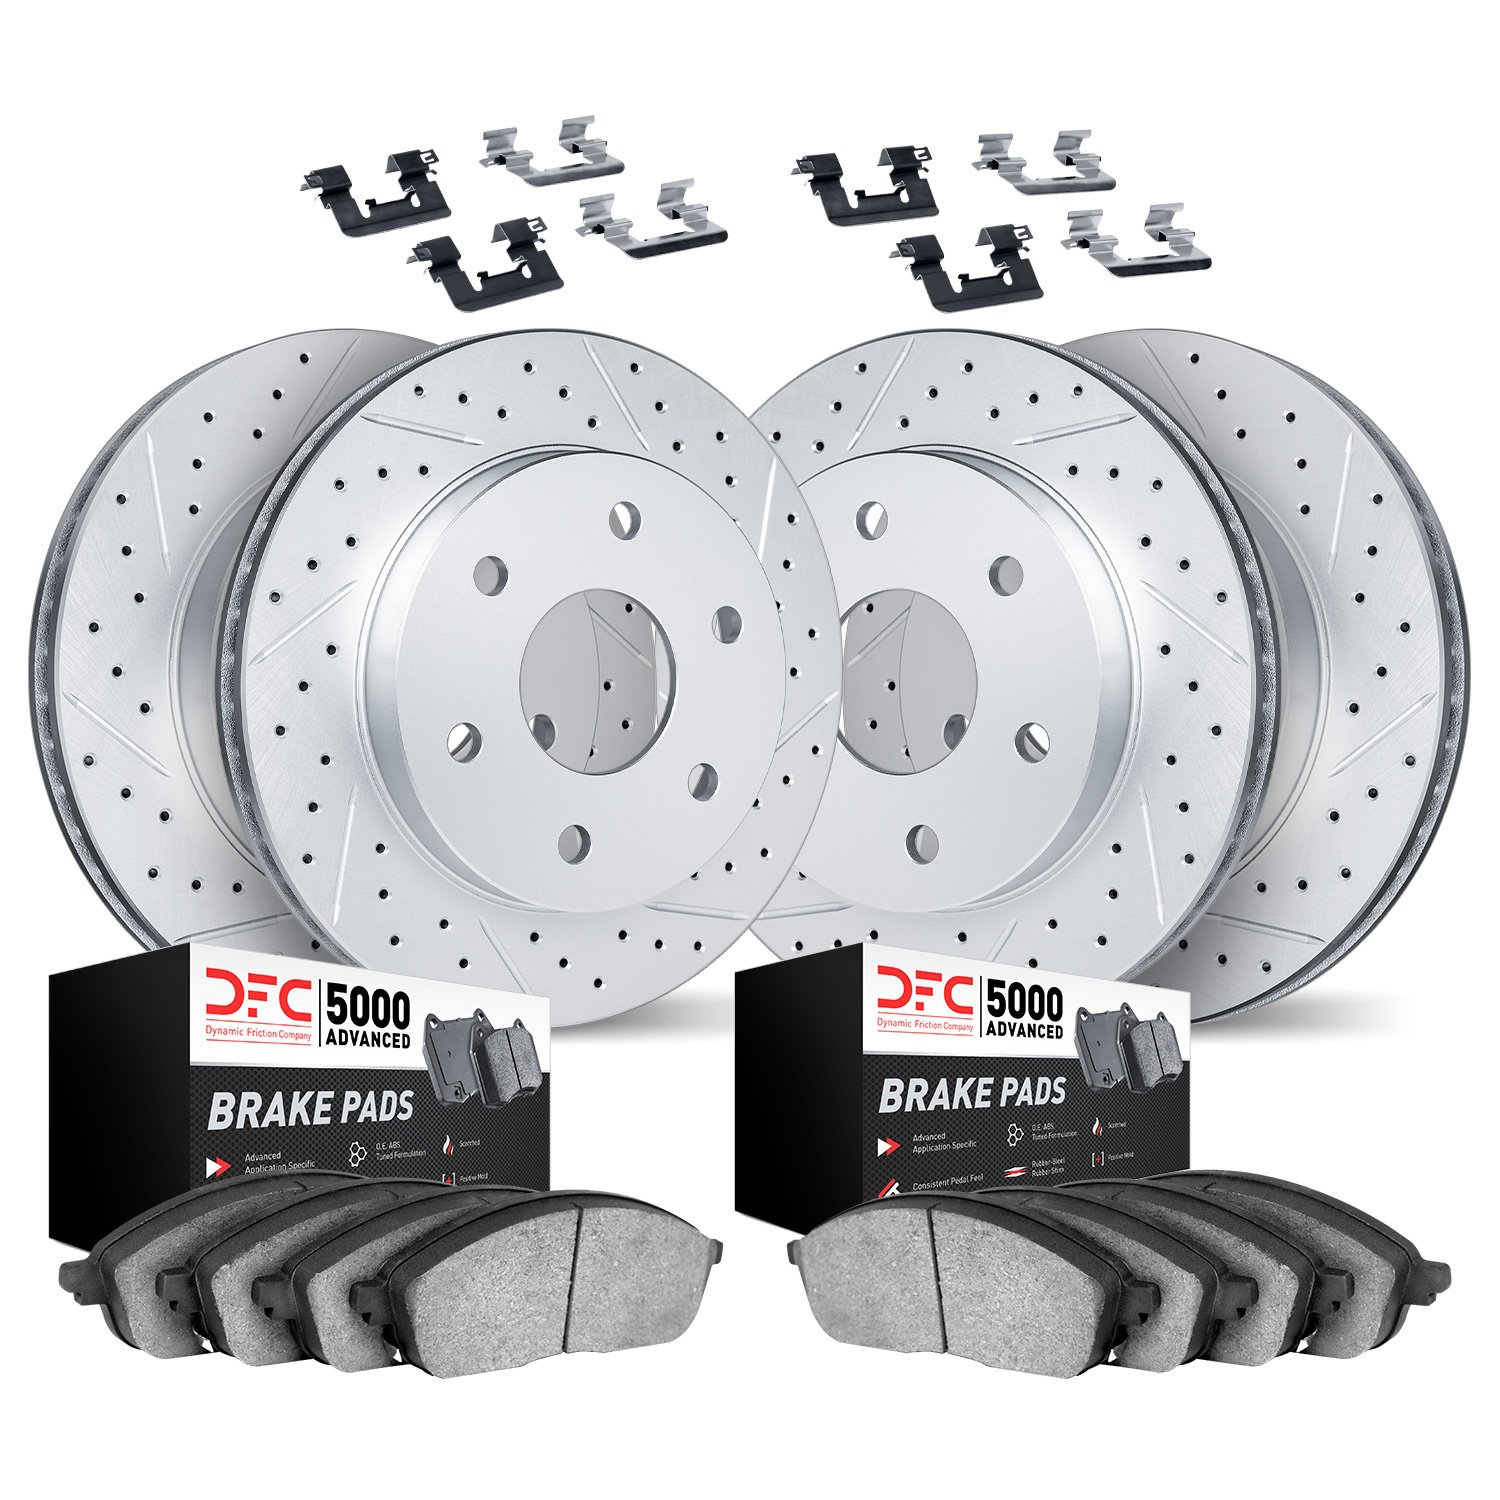 2514-48029 Geoperformance Drilled/Slotted Rotors w/5000 Advanced Brake Pads Kit & Hardware, 2006-2009 GM, Position: Front and Re